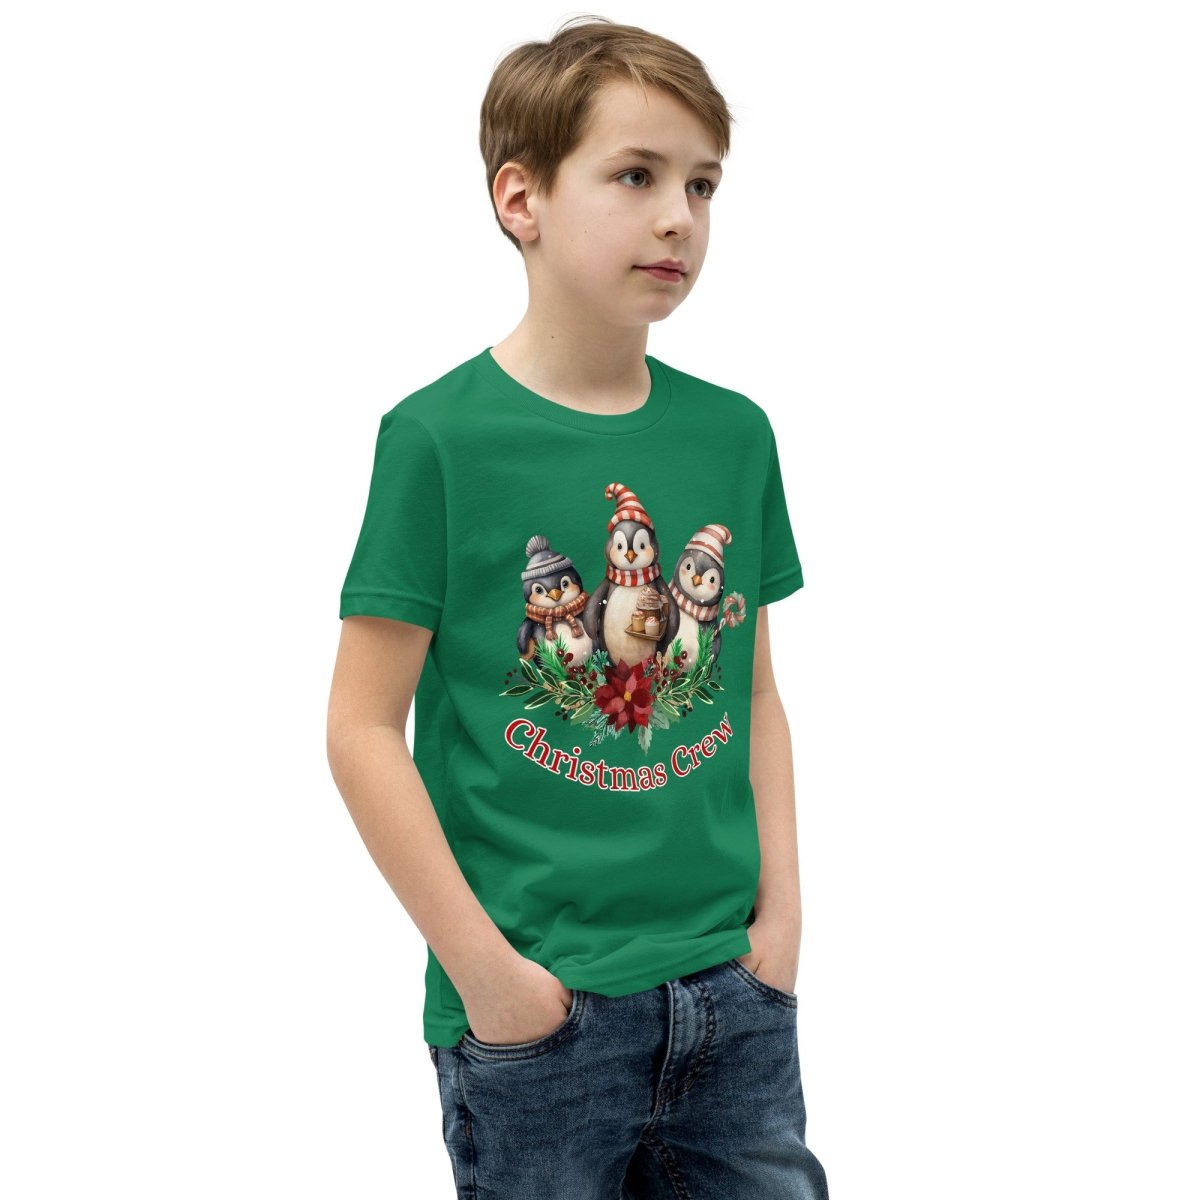 Penguin Christmas Crew T-Shirt - High Quality Festive Family Teenager T-Shirt, Family Reunion Tee, Holiday Shirt, Youth Christmas Tee - Everything Pixel